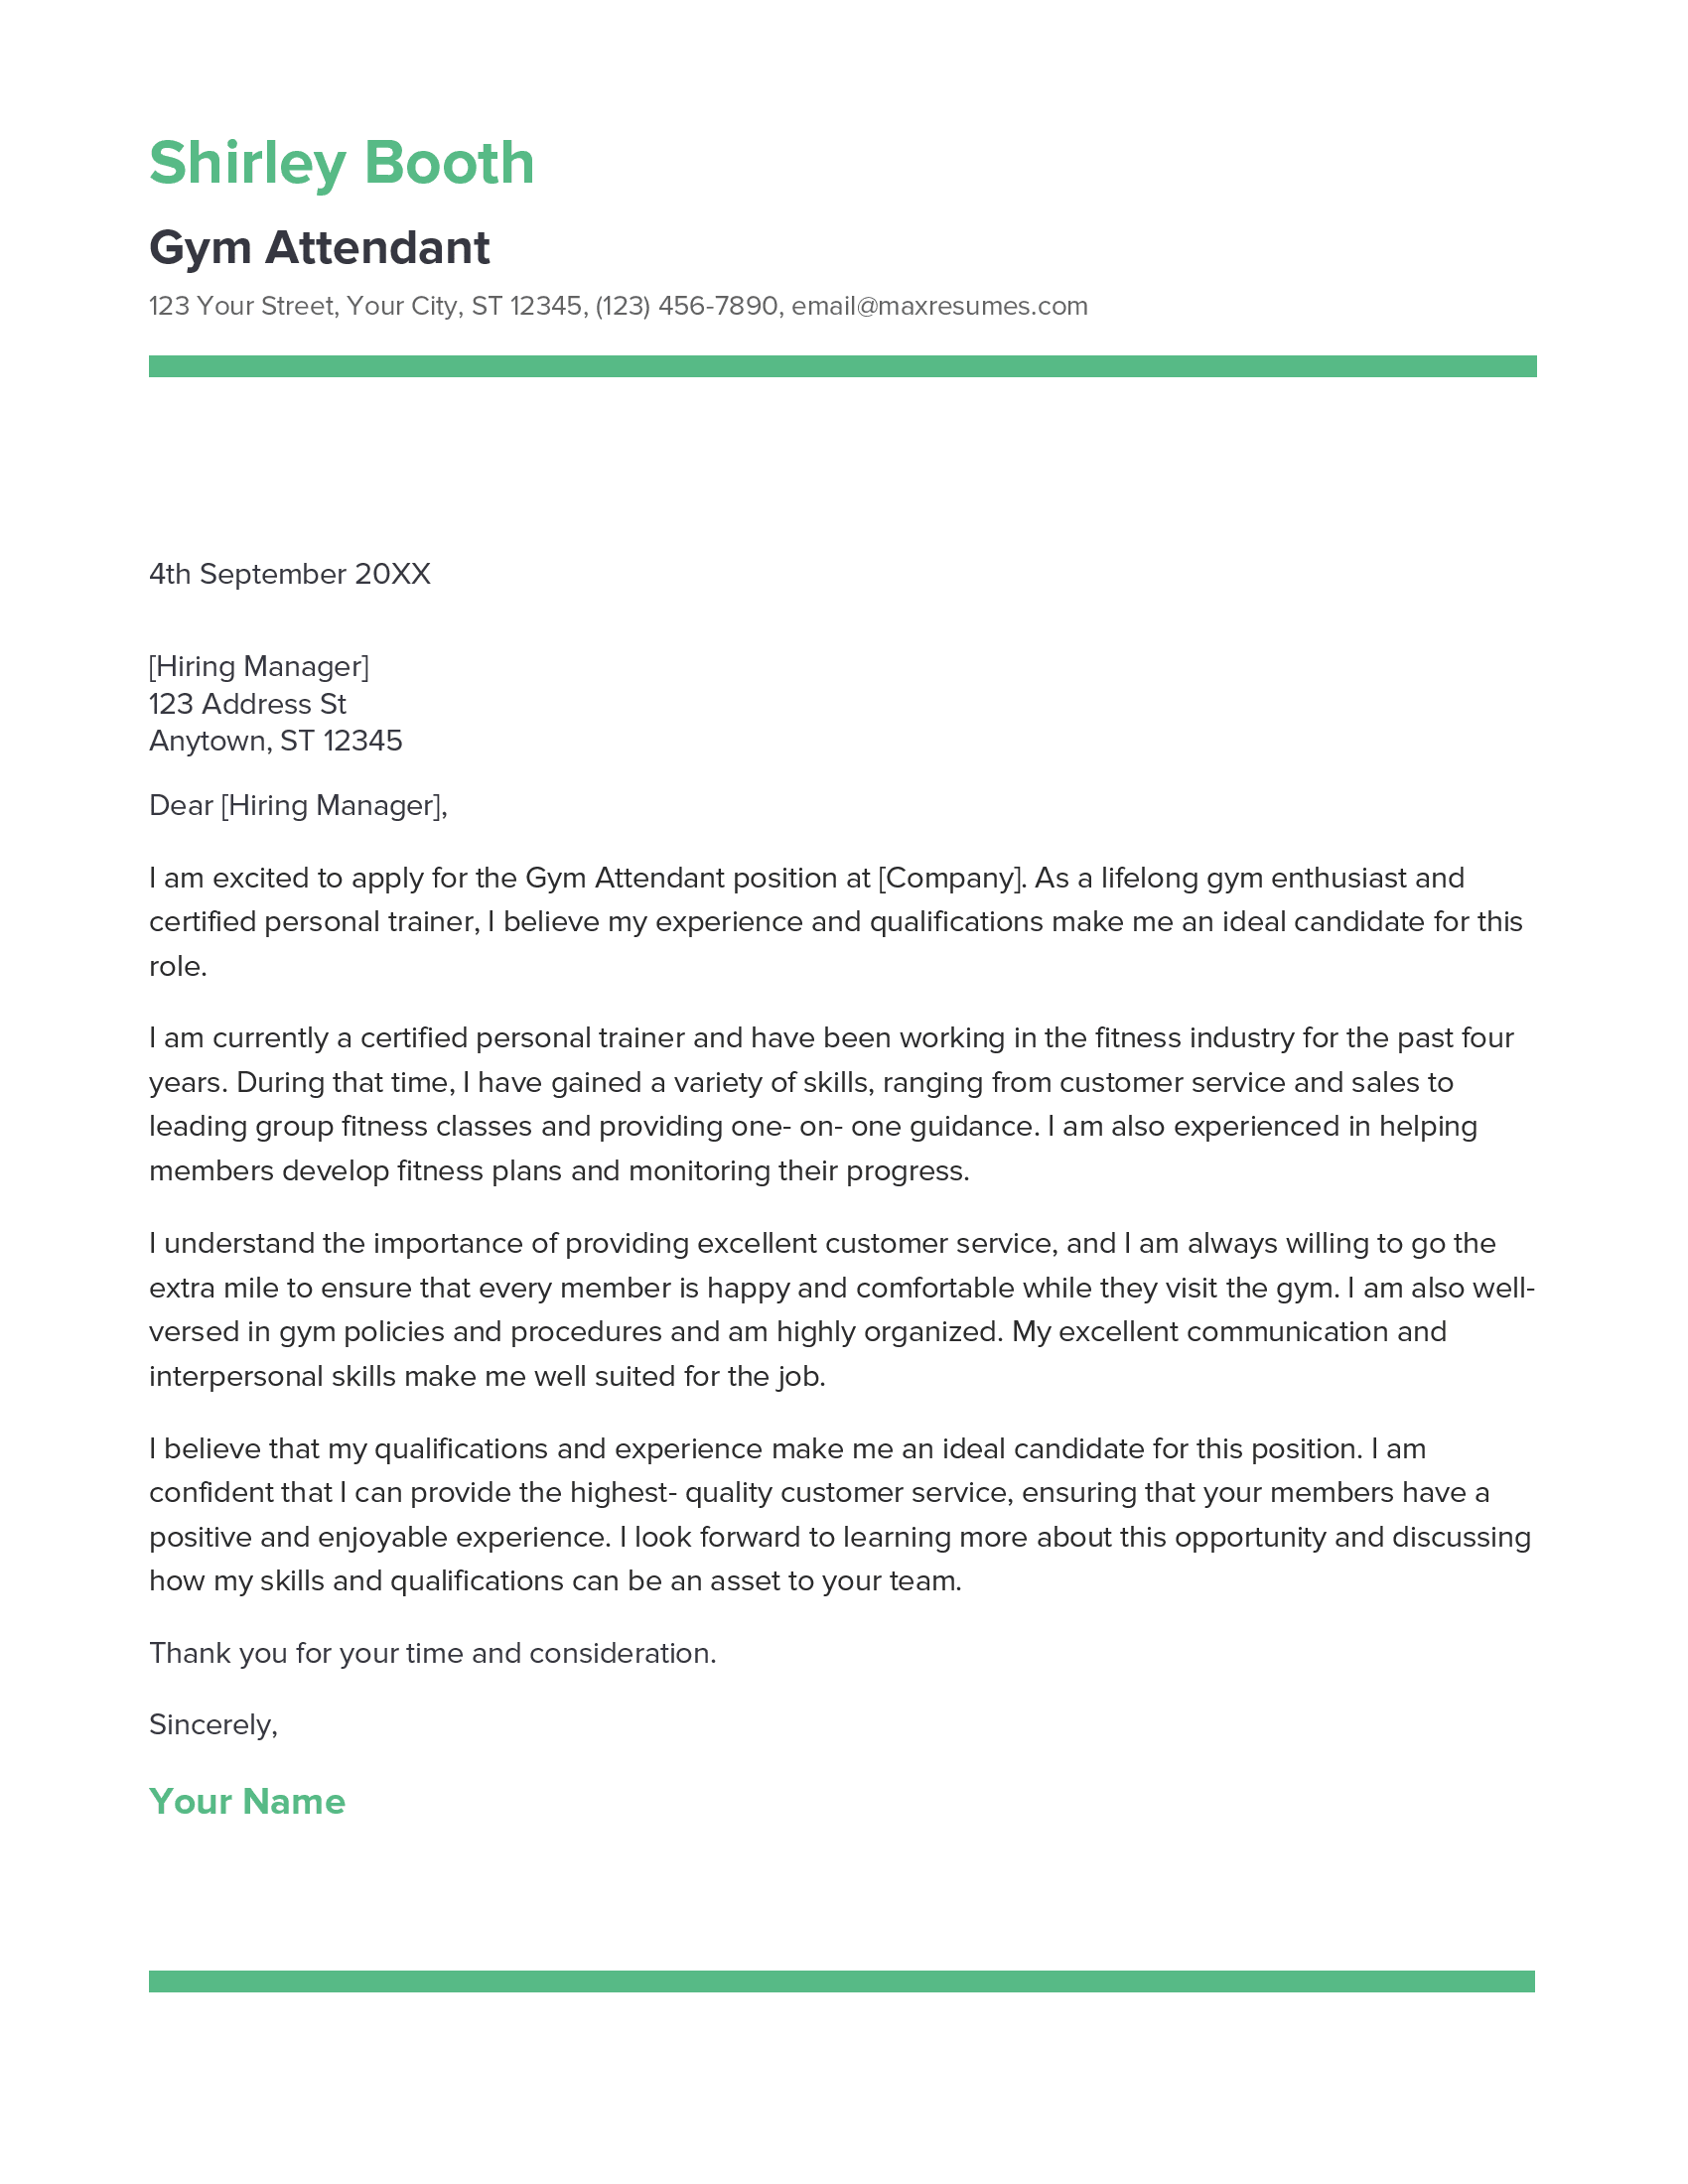 Best Gym Attendant Cover Letter Example for 2023